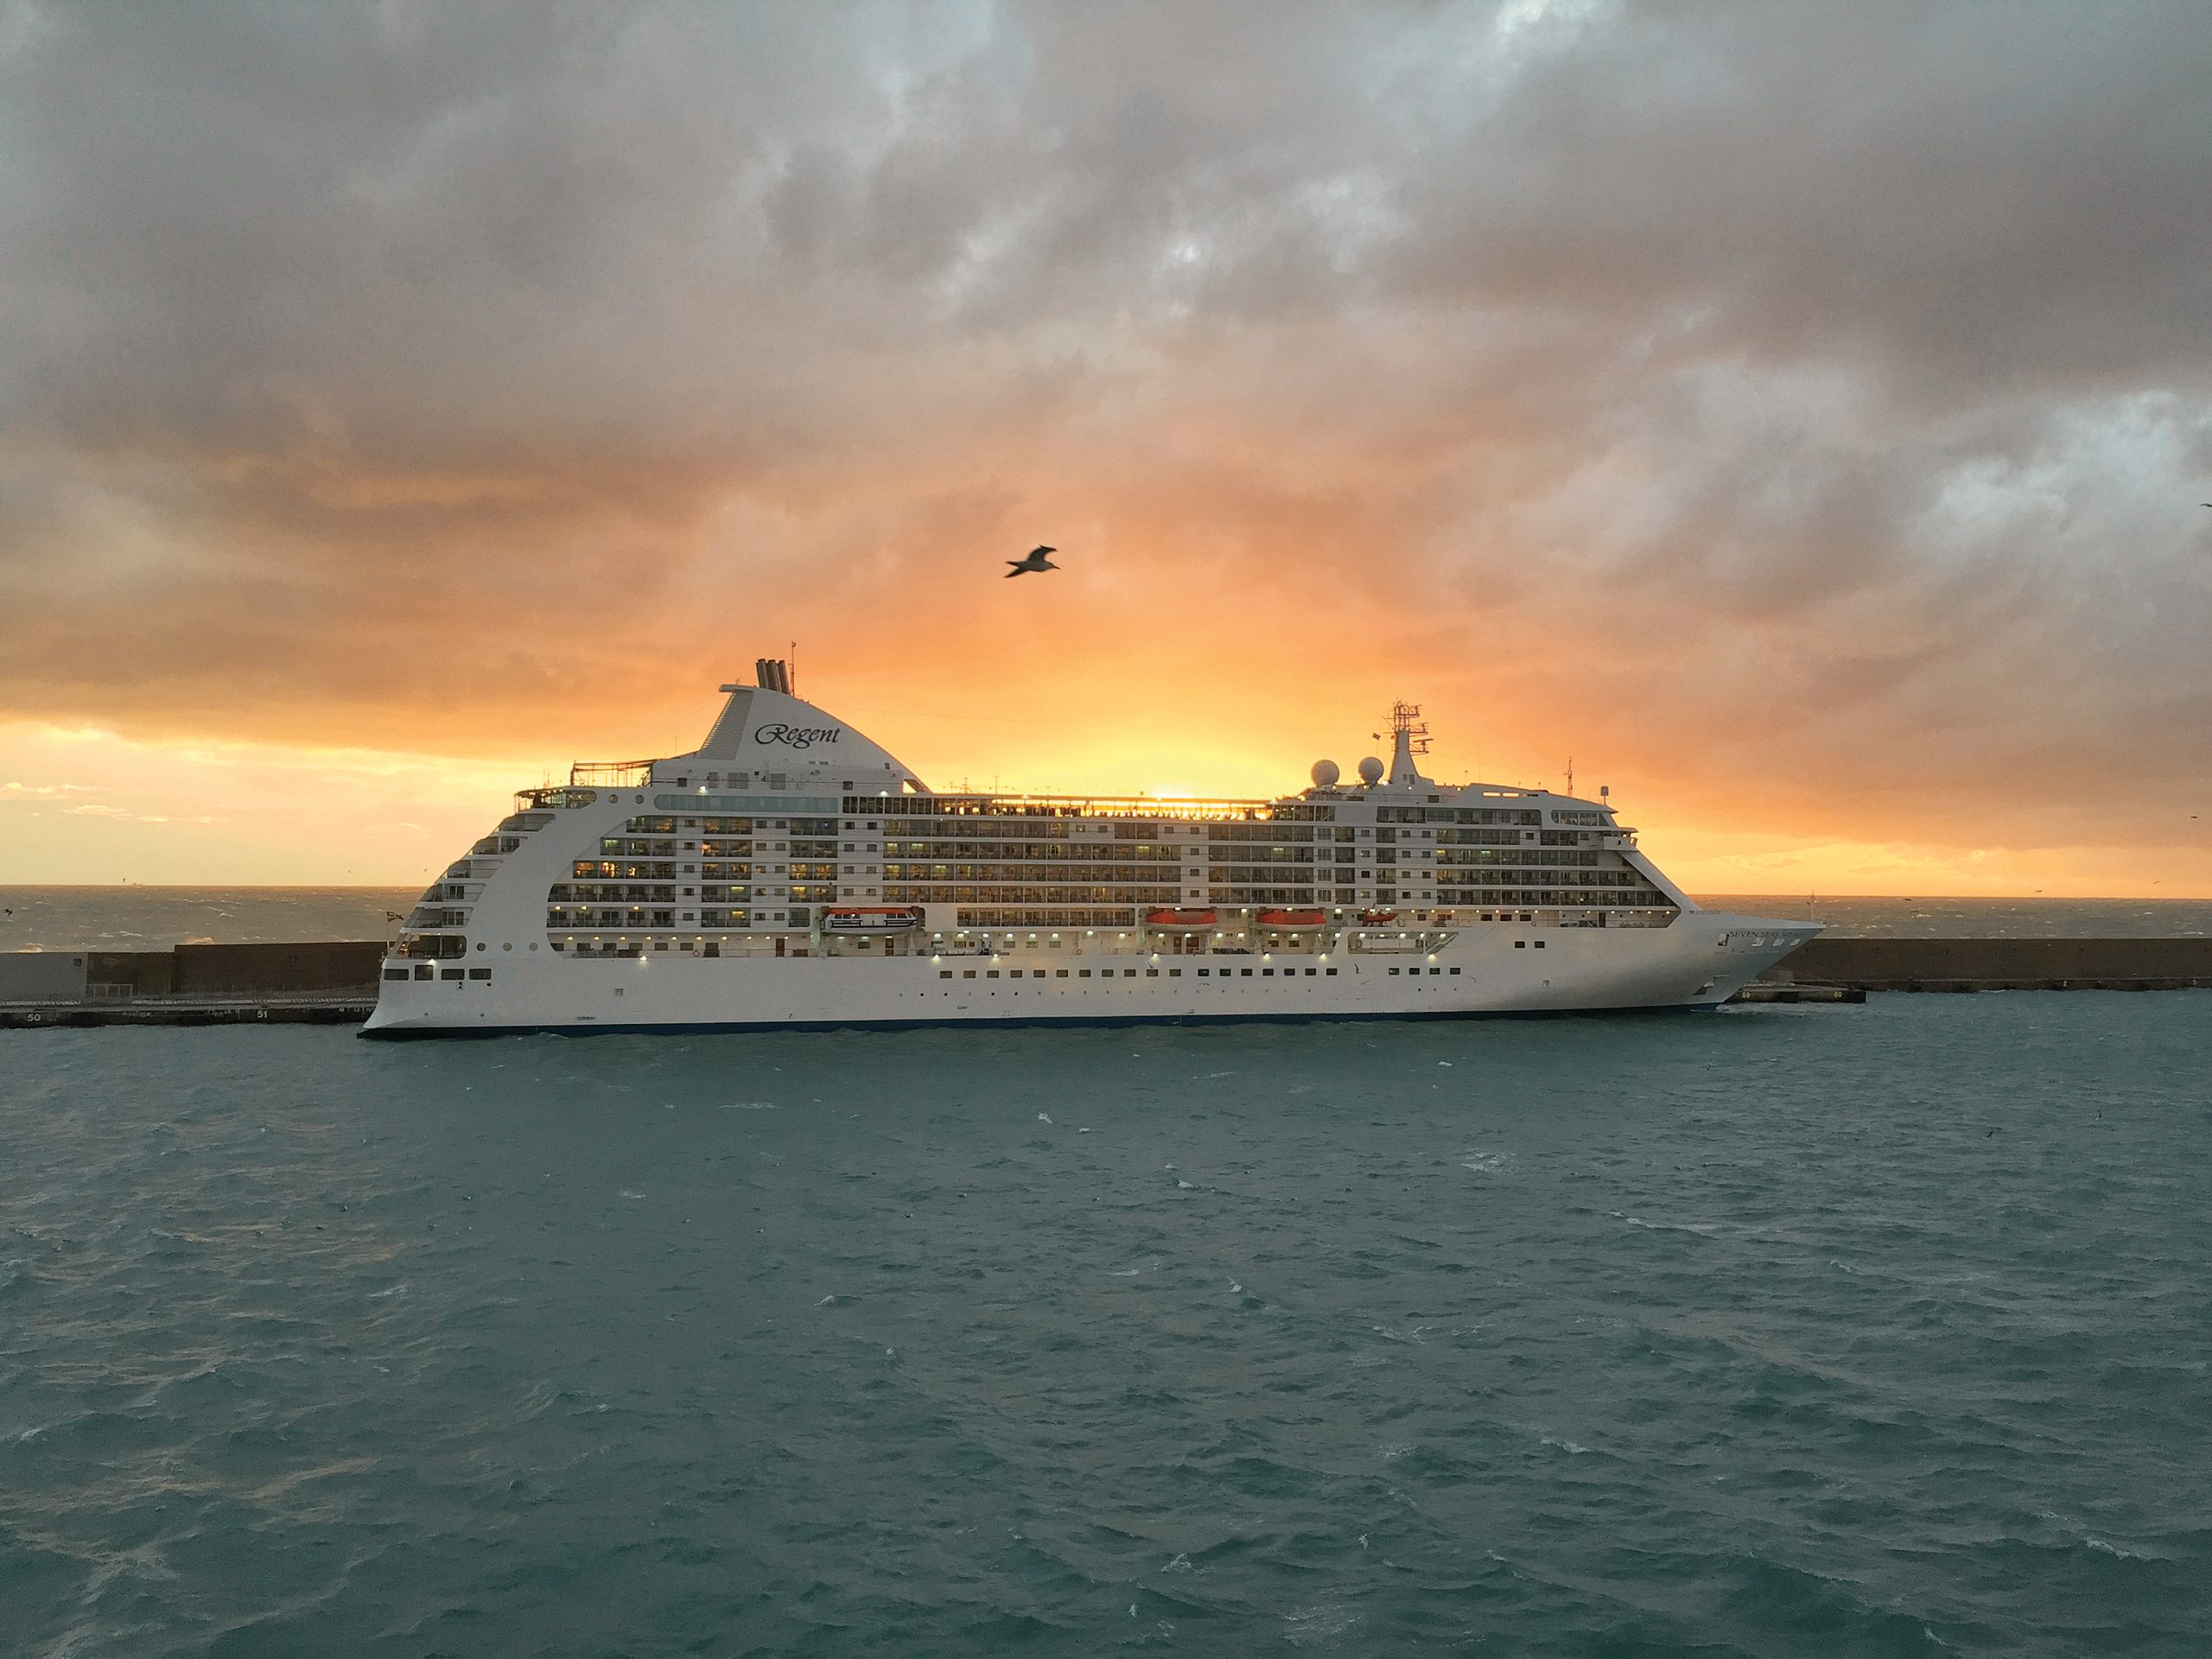 Sail in Wonder for 150 nights, visiting 97 ports in 25 countries with Seven Seas Mariner